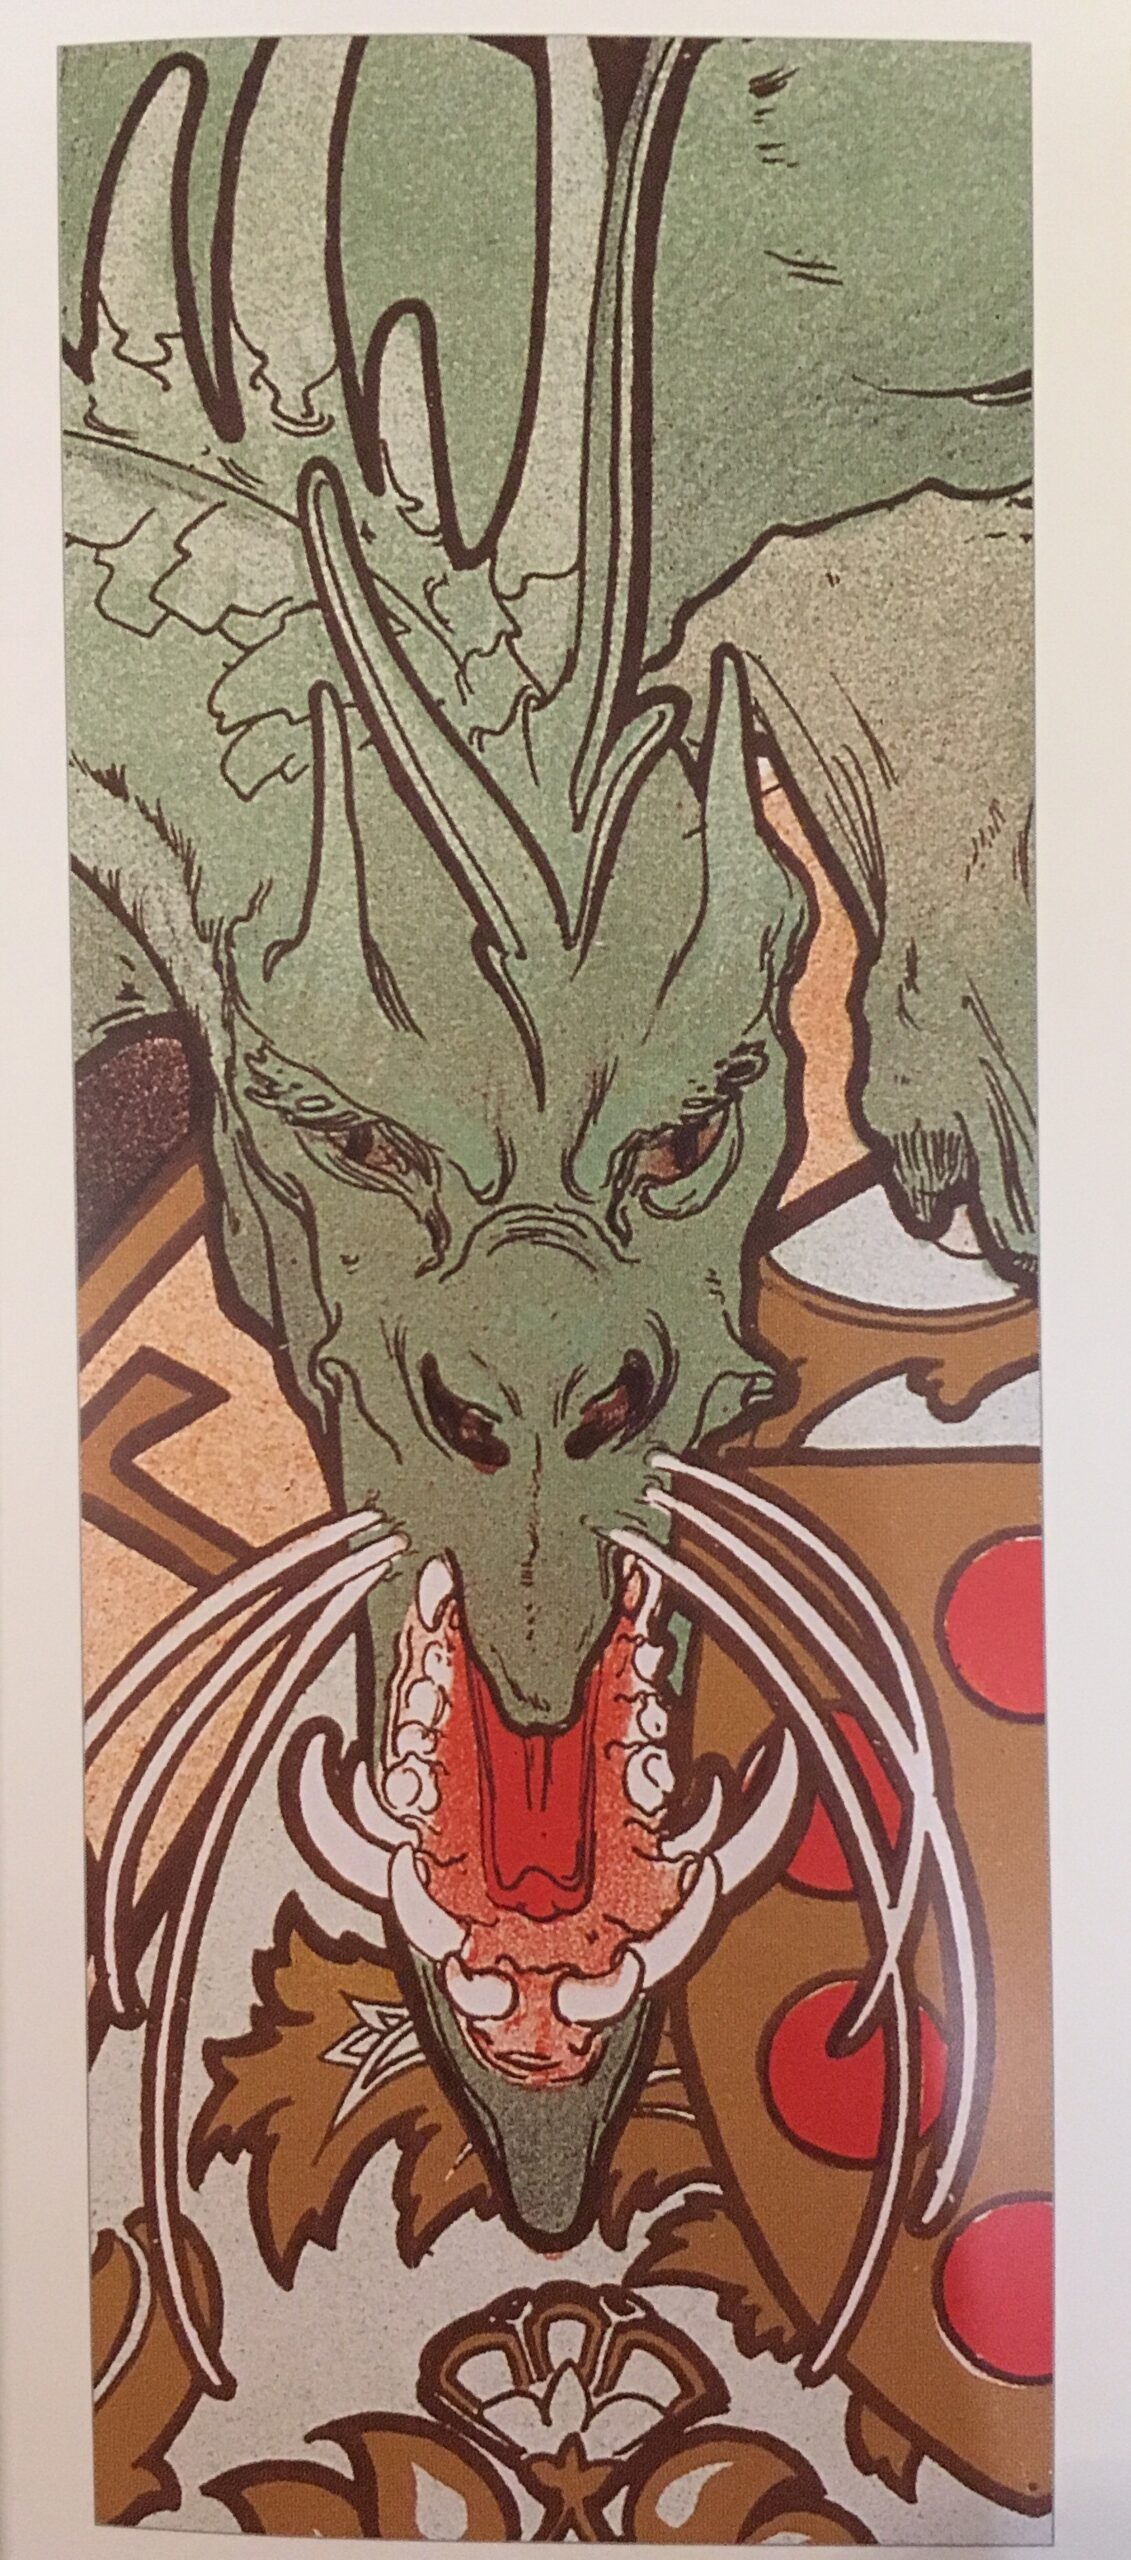 Tall narrow rectangle filled with a green dragon that adorns an Alfons Mucha poster of 1896 for the Lorenzaccio play. The dragon has its mouth open and is surrounded by geometric motifs.